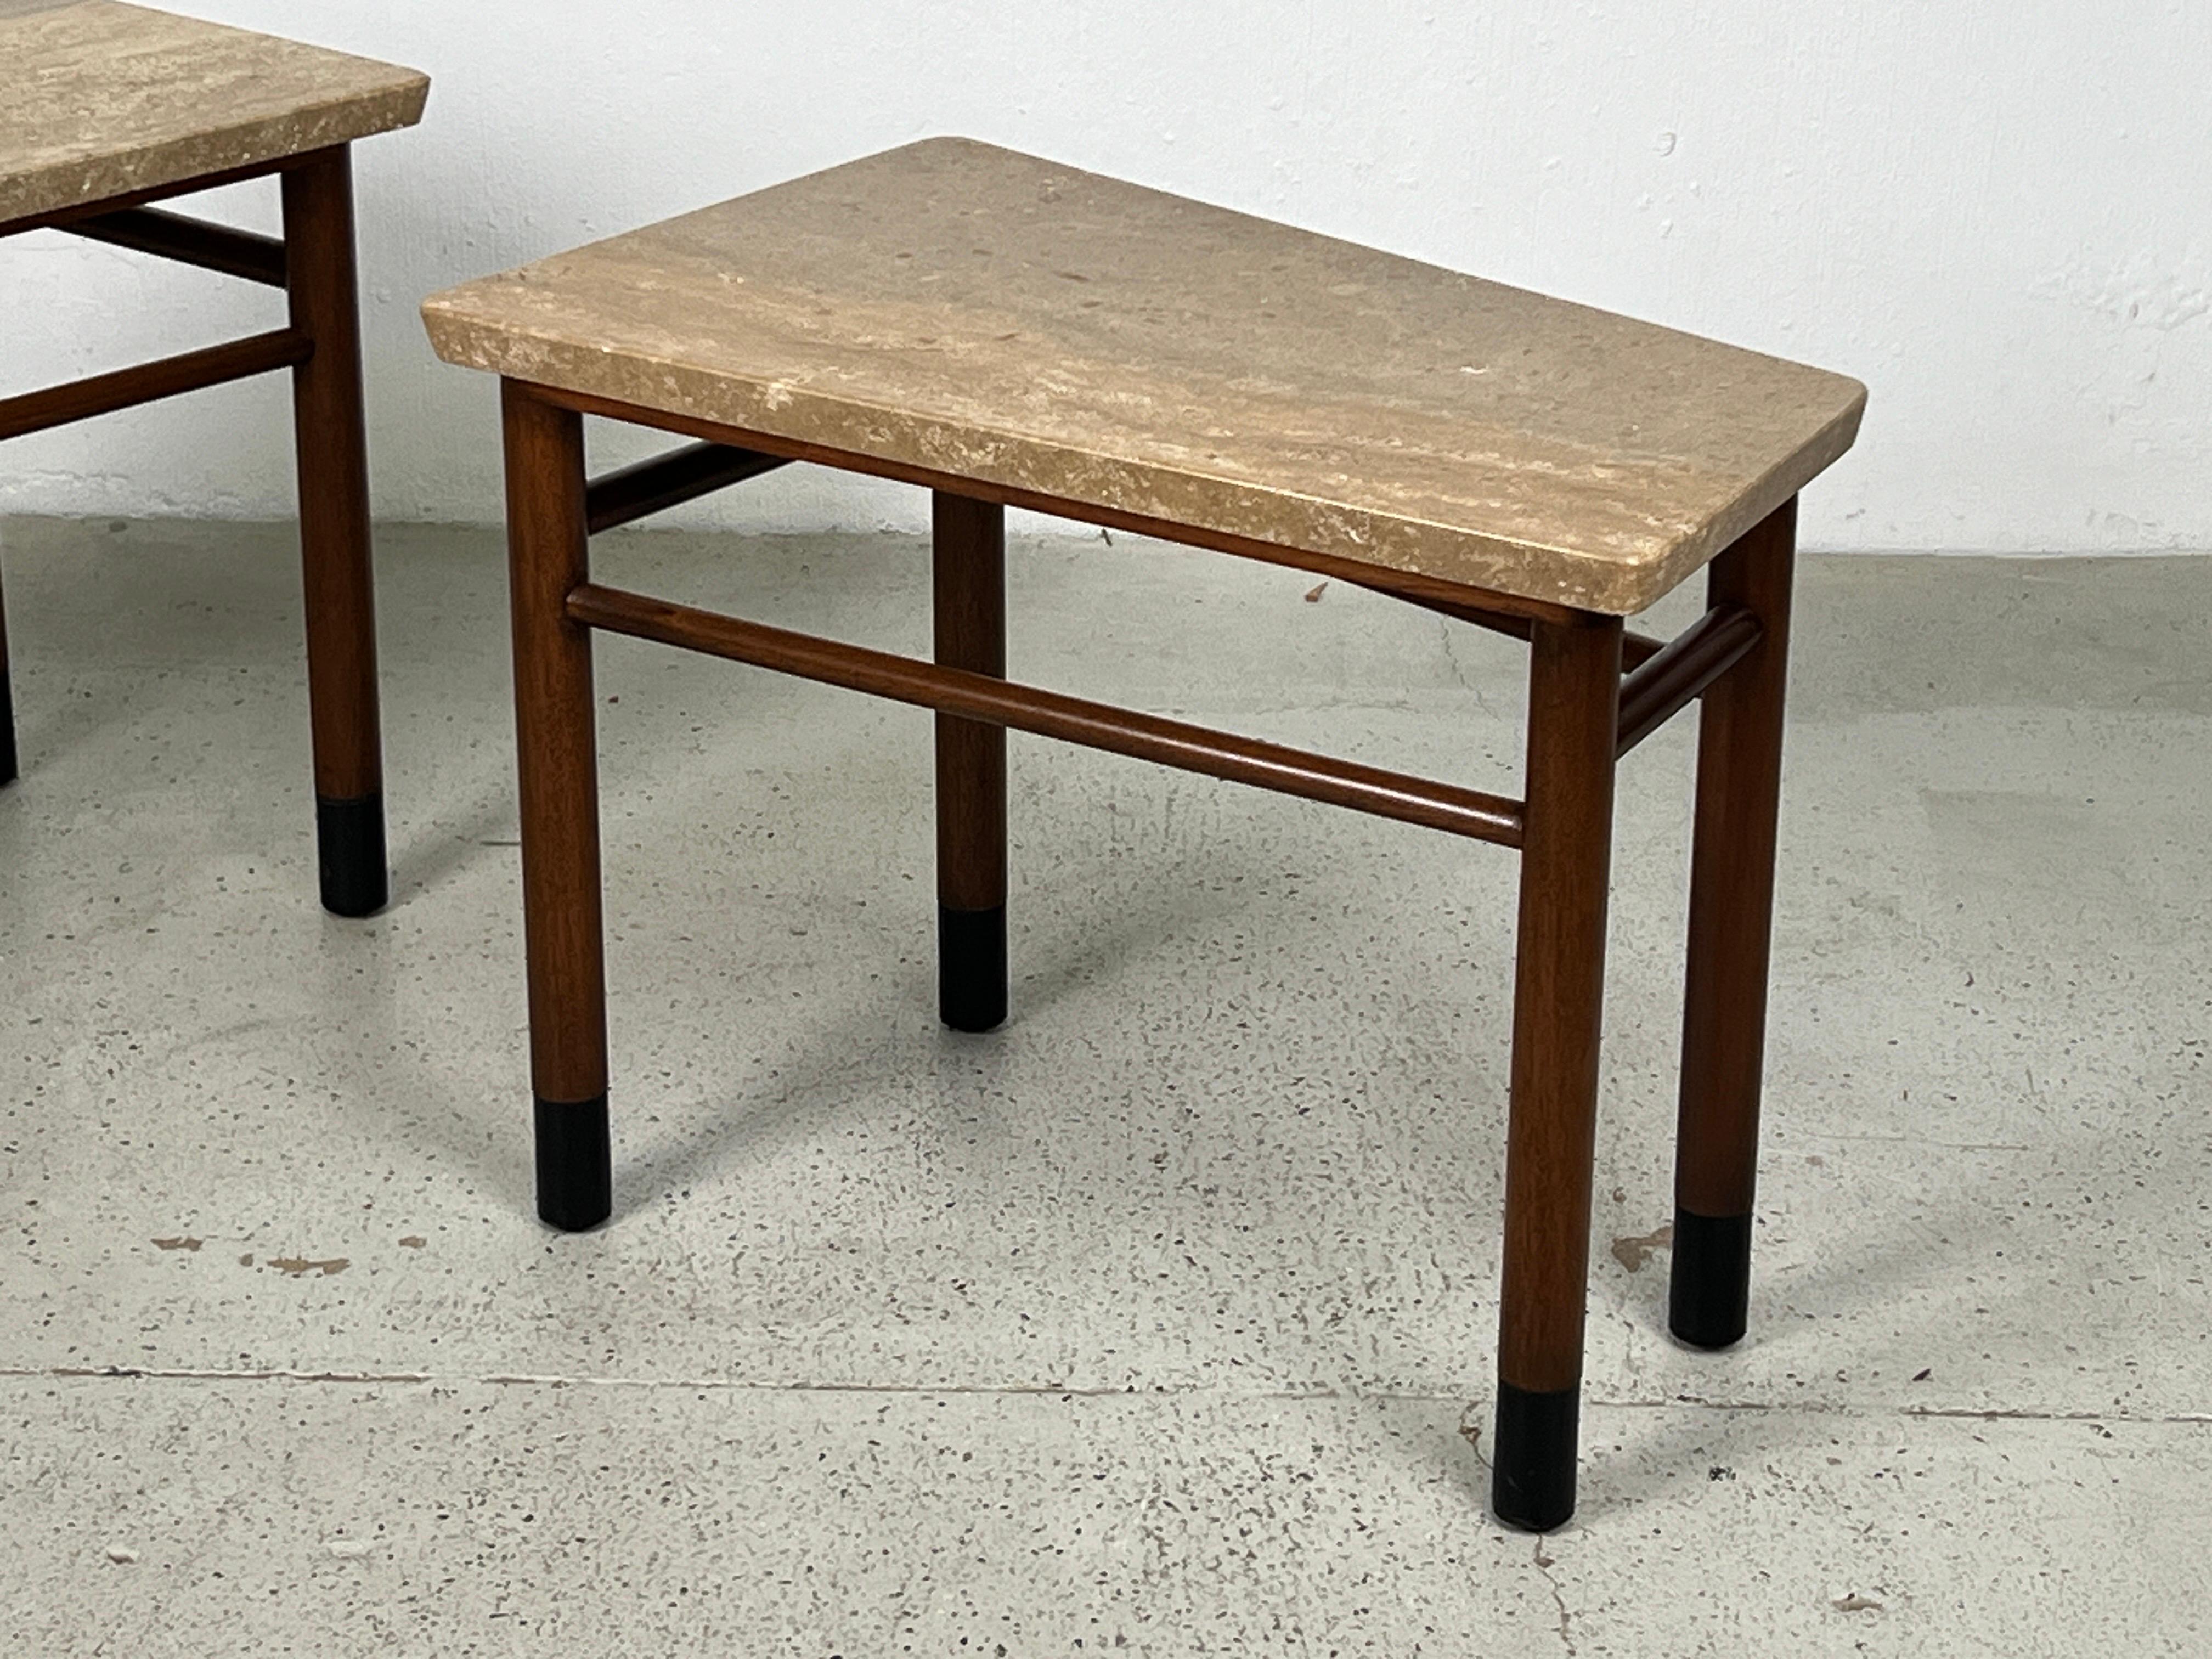 Mid-20th Century Pair of Wedge Shaped Travertine Tables by Edward Wormley for Dunbar For Sale